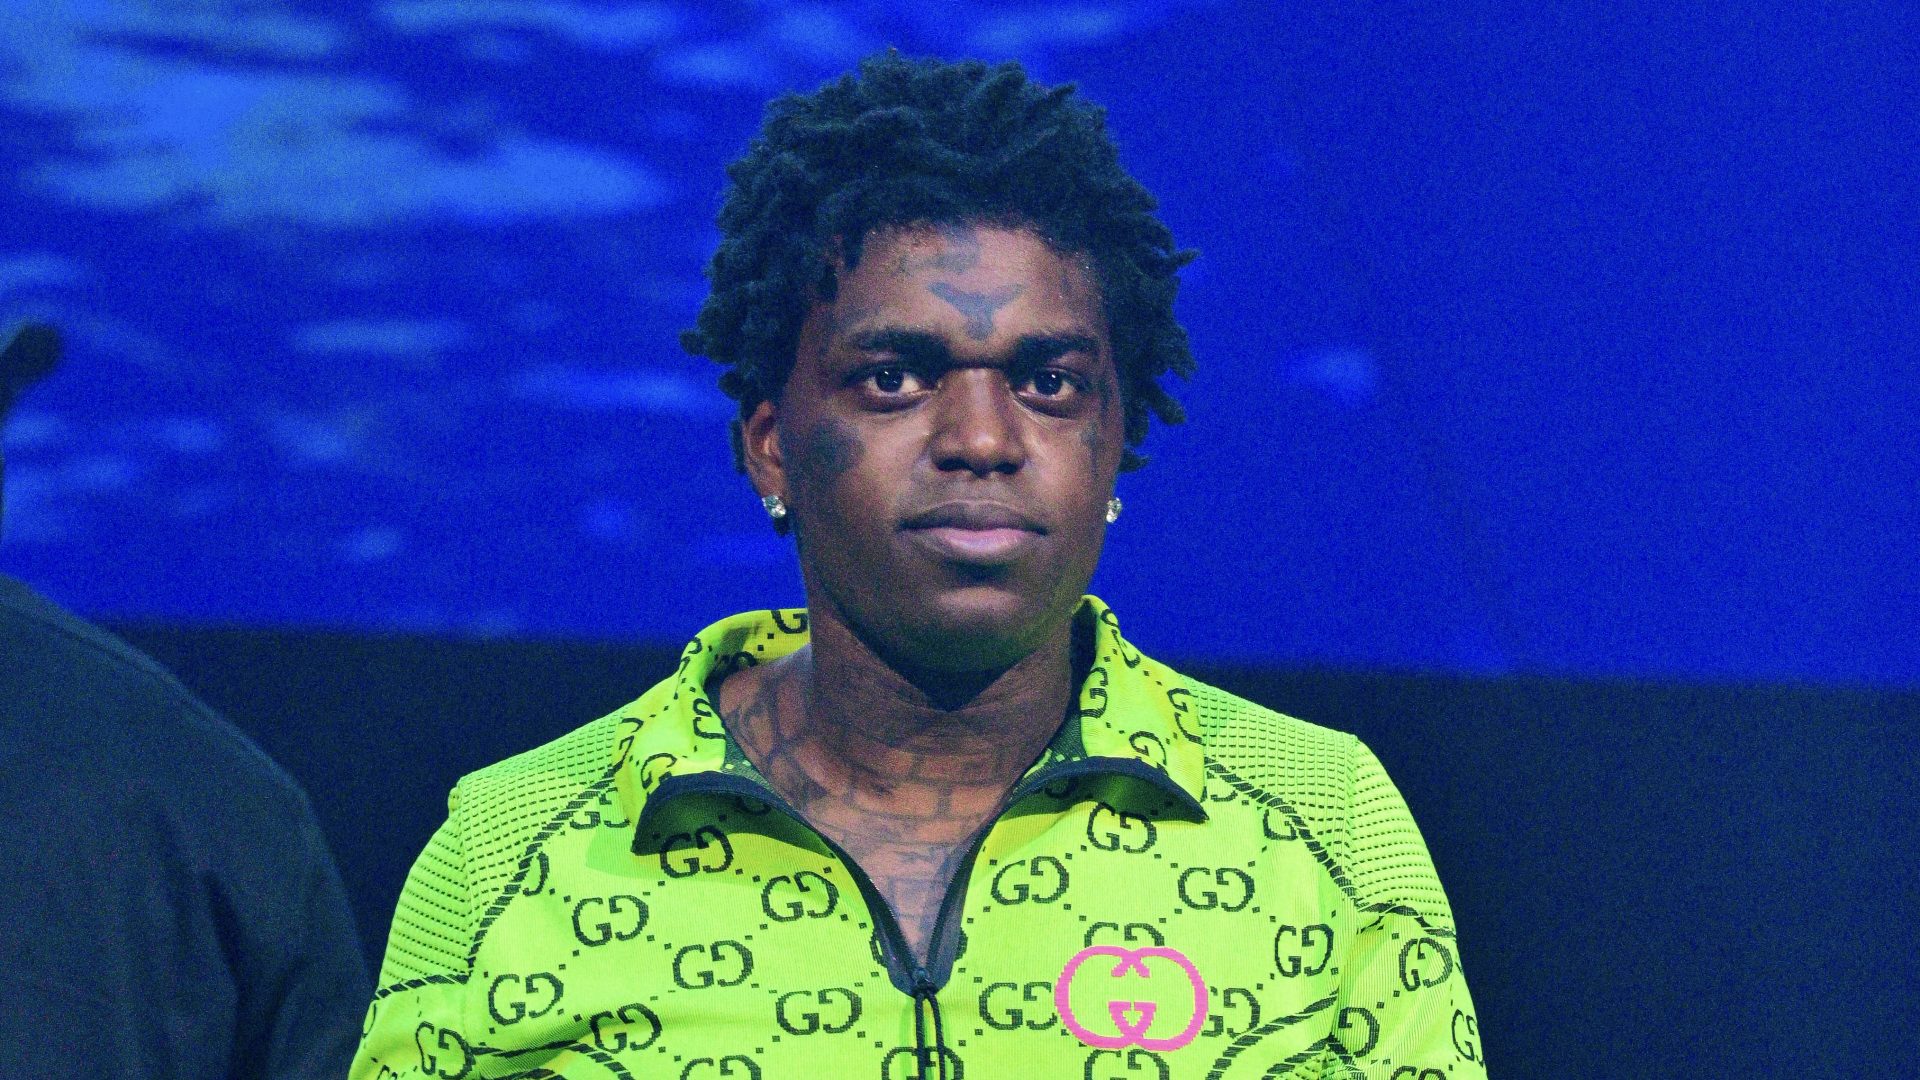 UPDATE: Kodak Black Pleads Not Guilty After Being Hit With Multiple Charges Including Drug Possession thumbnail